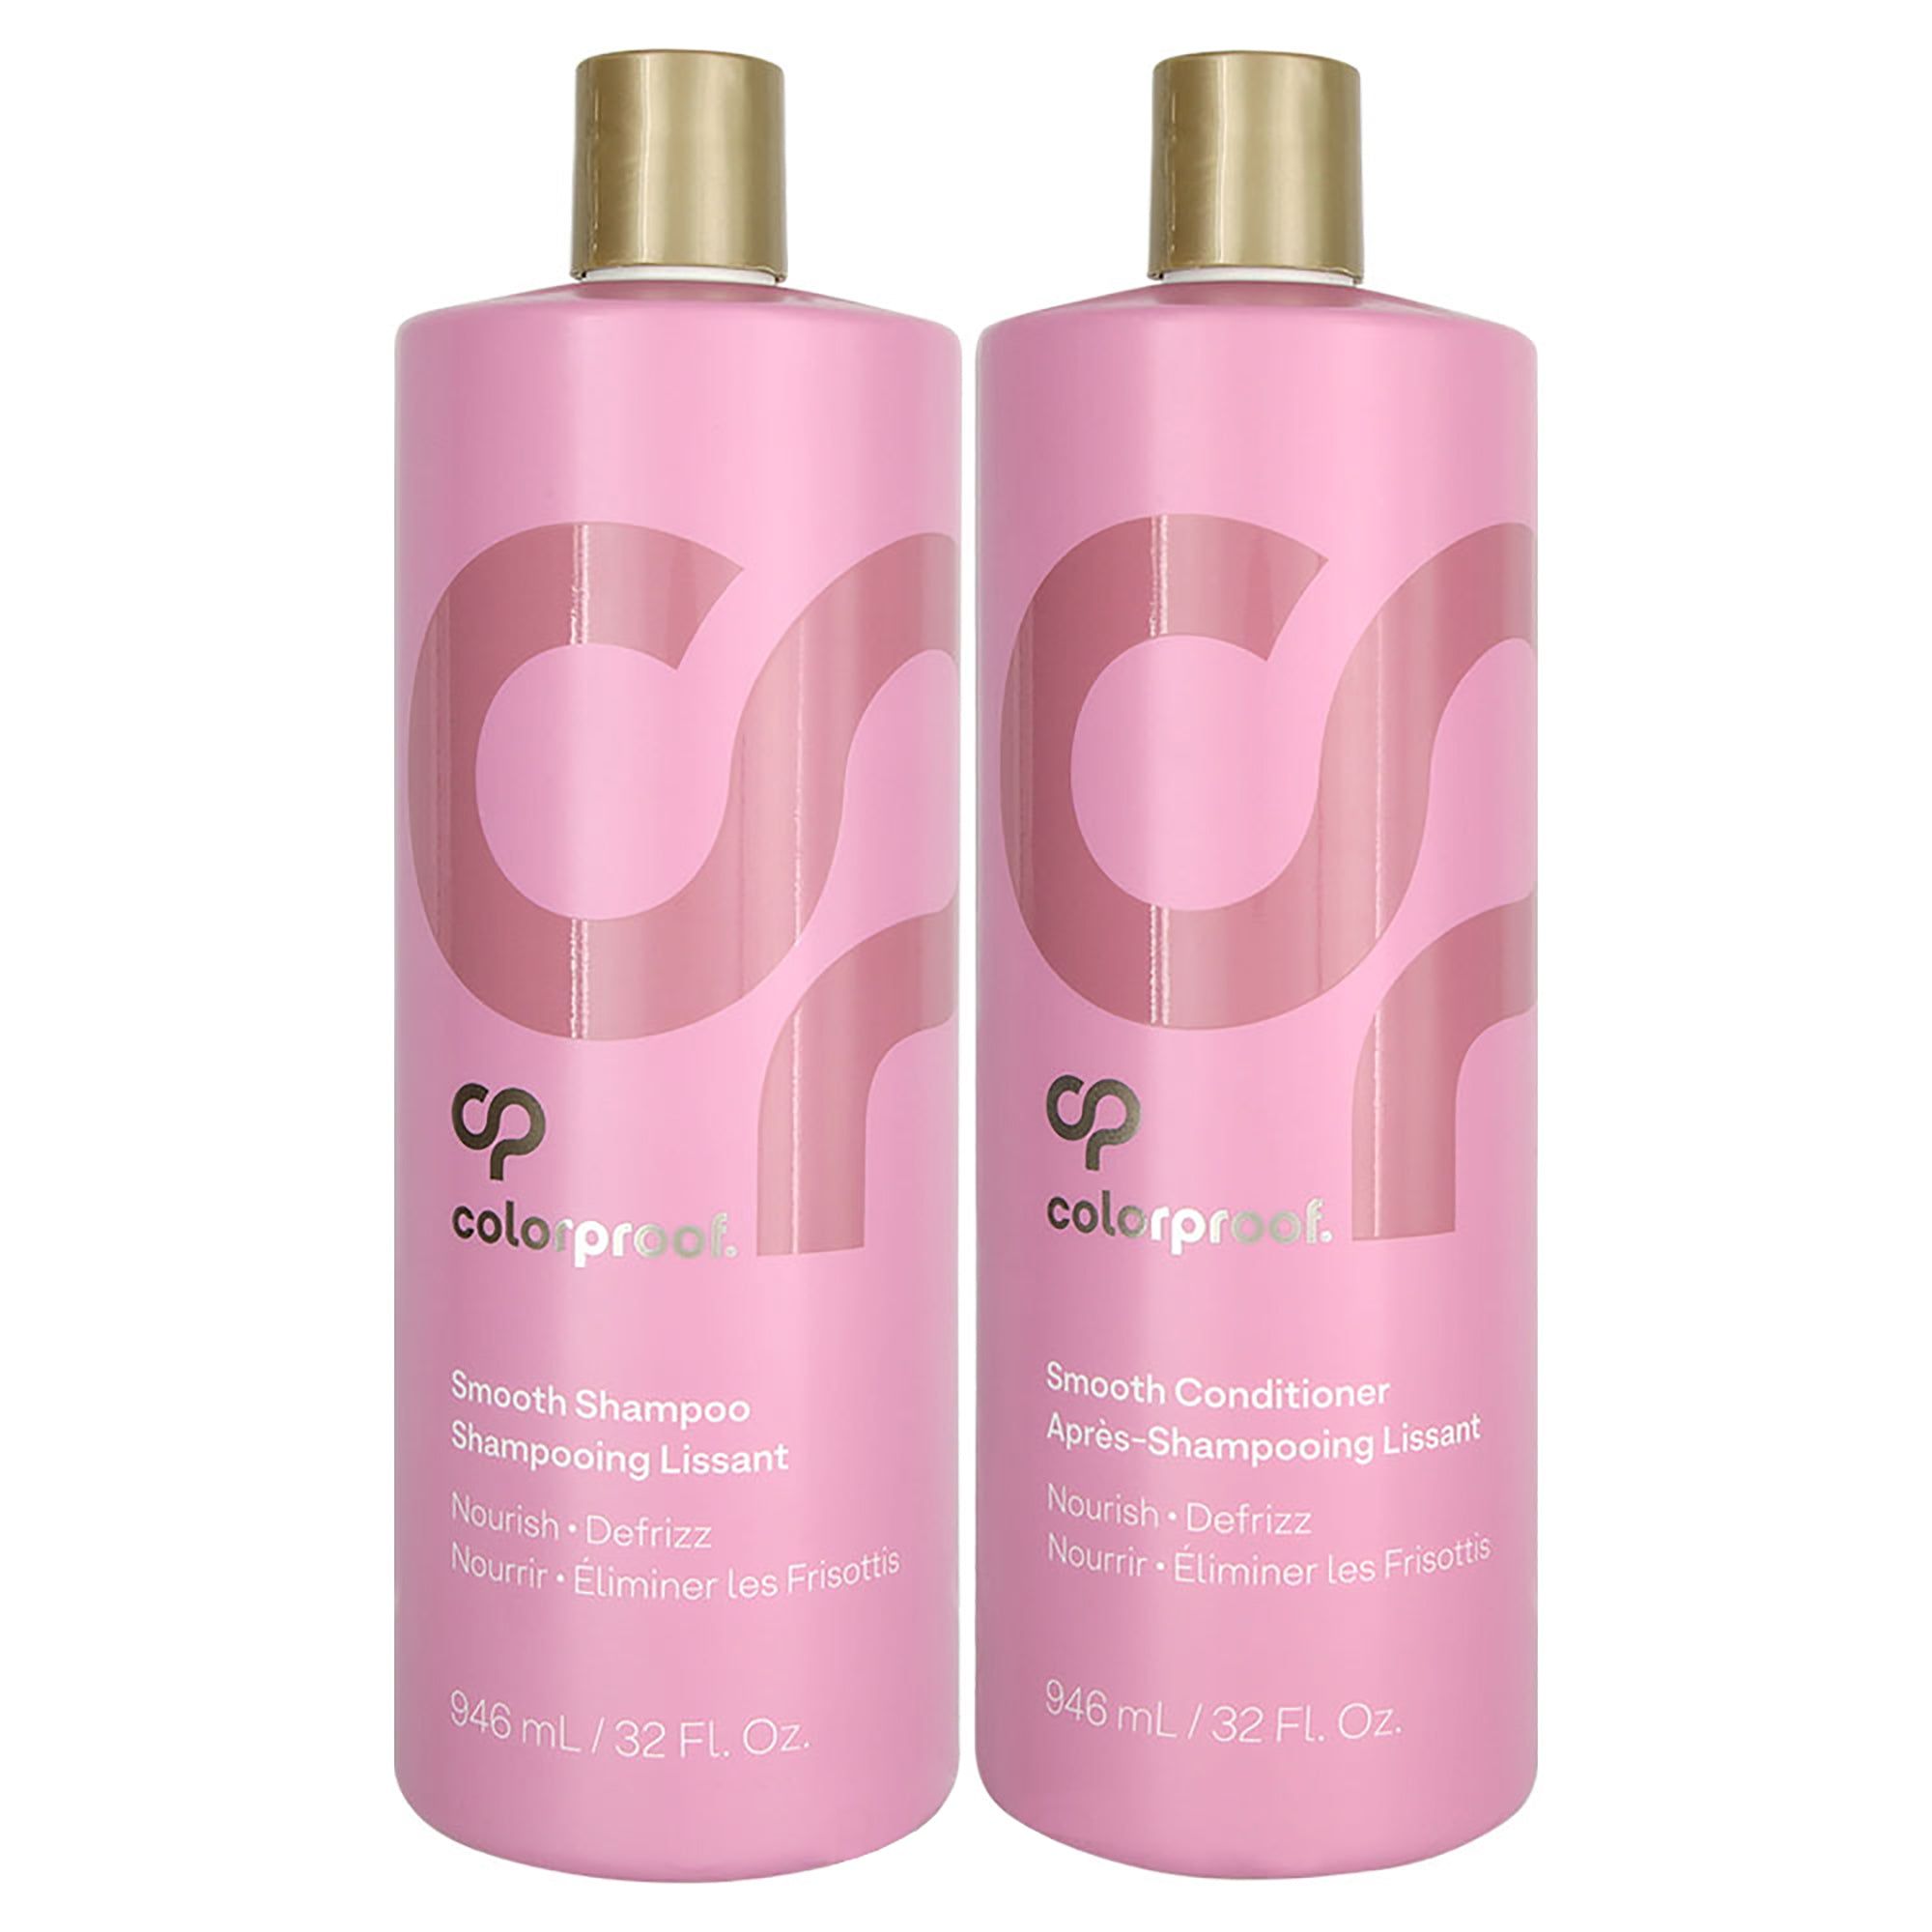 Colorproof Smooth Shampoo and Conditioner Liter Duo ($198 Value) / 33OZ